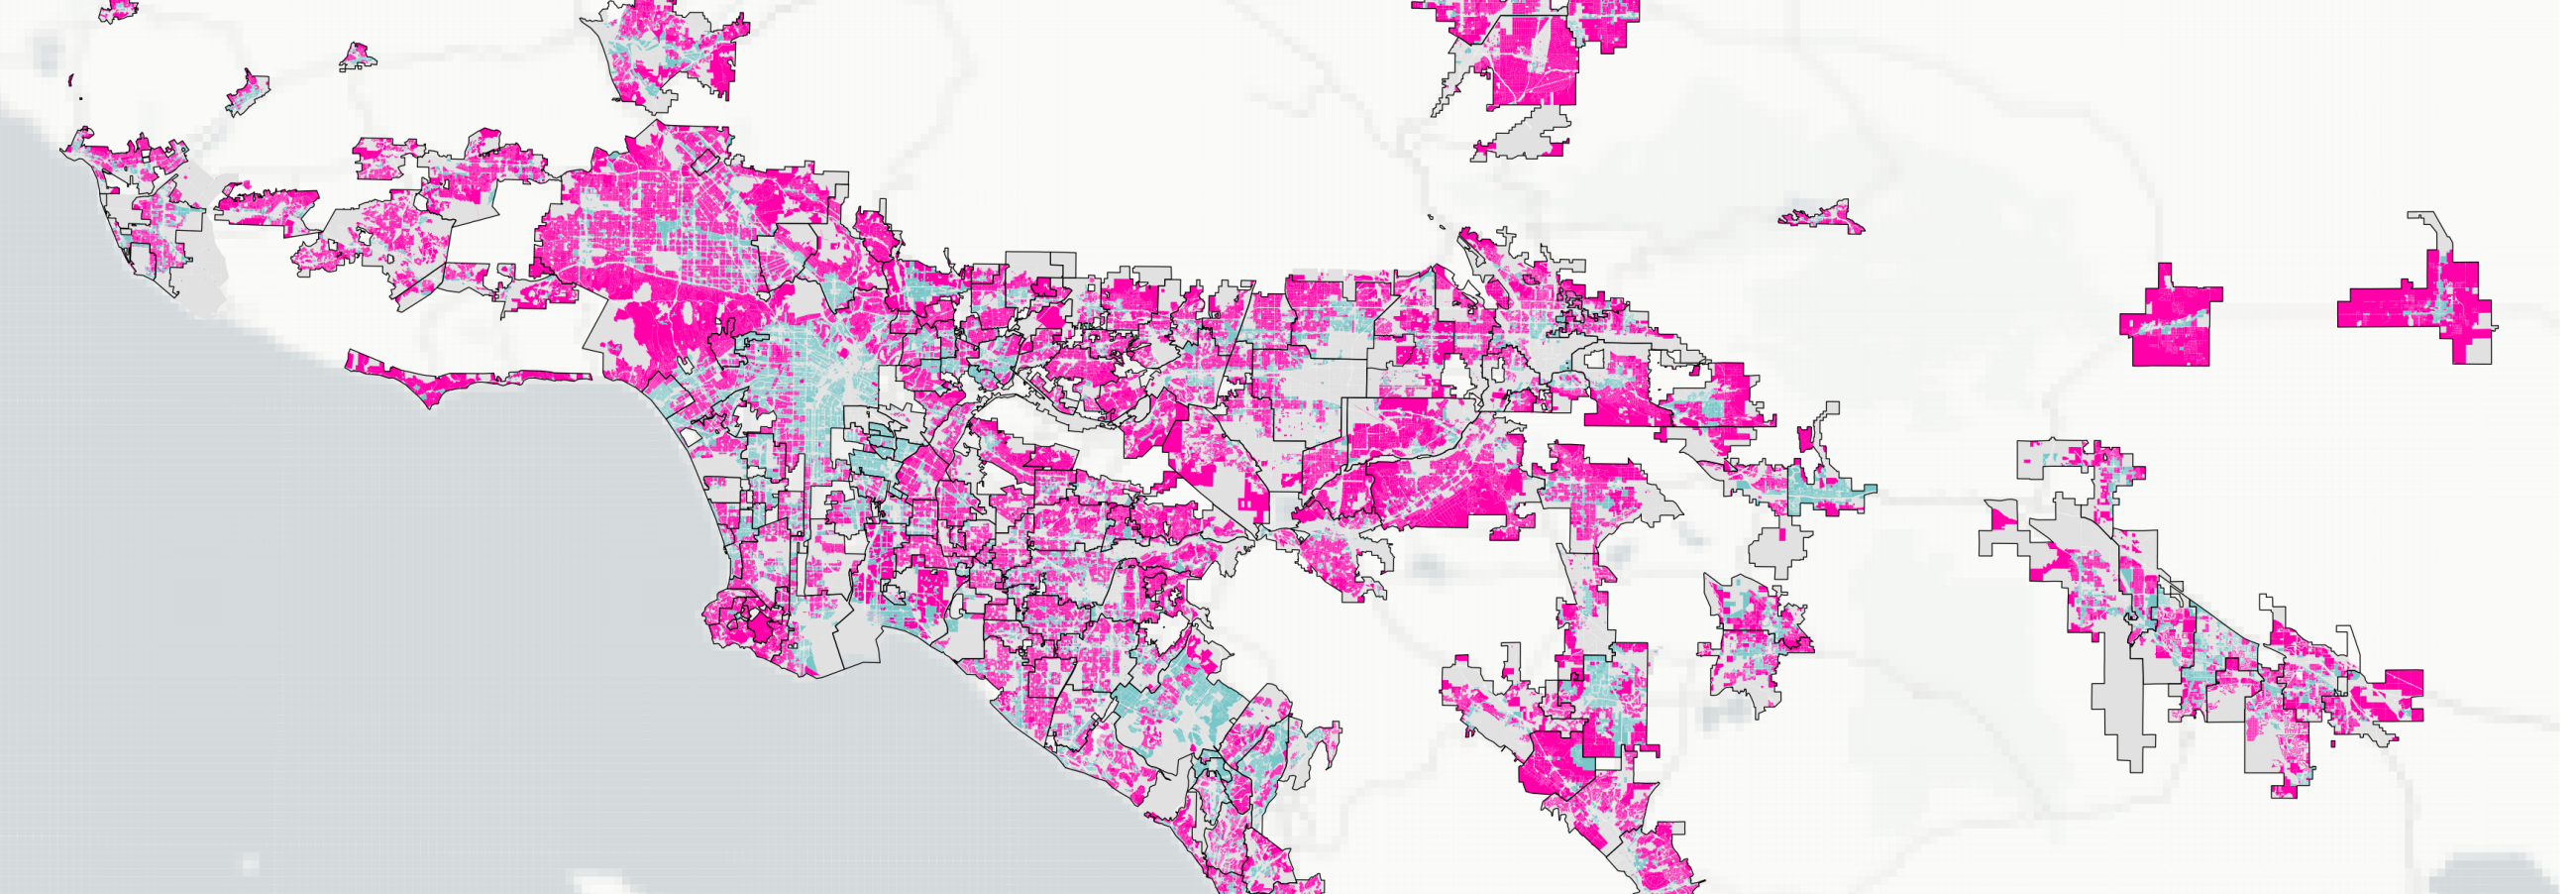 SCAG map of single family zoned cities